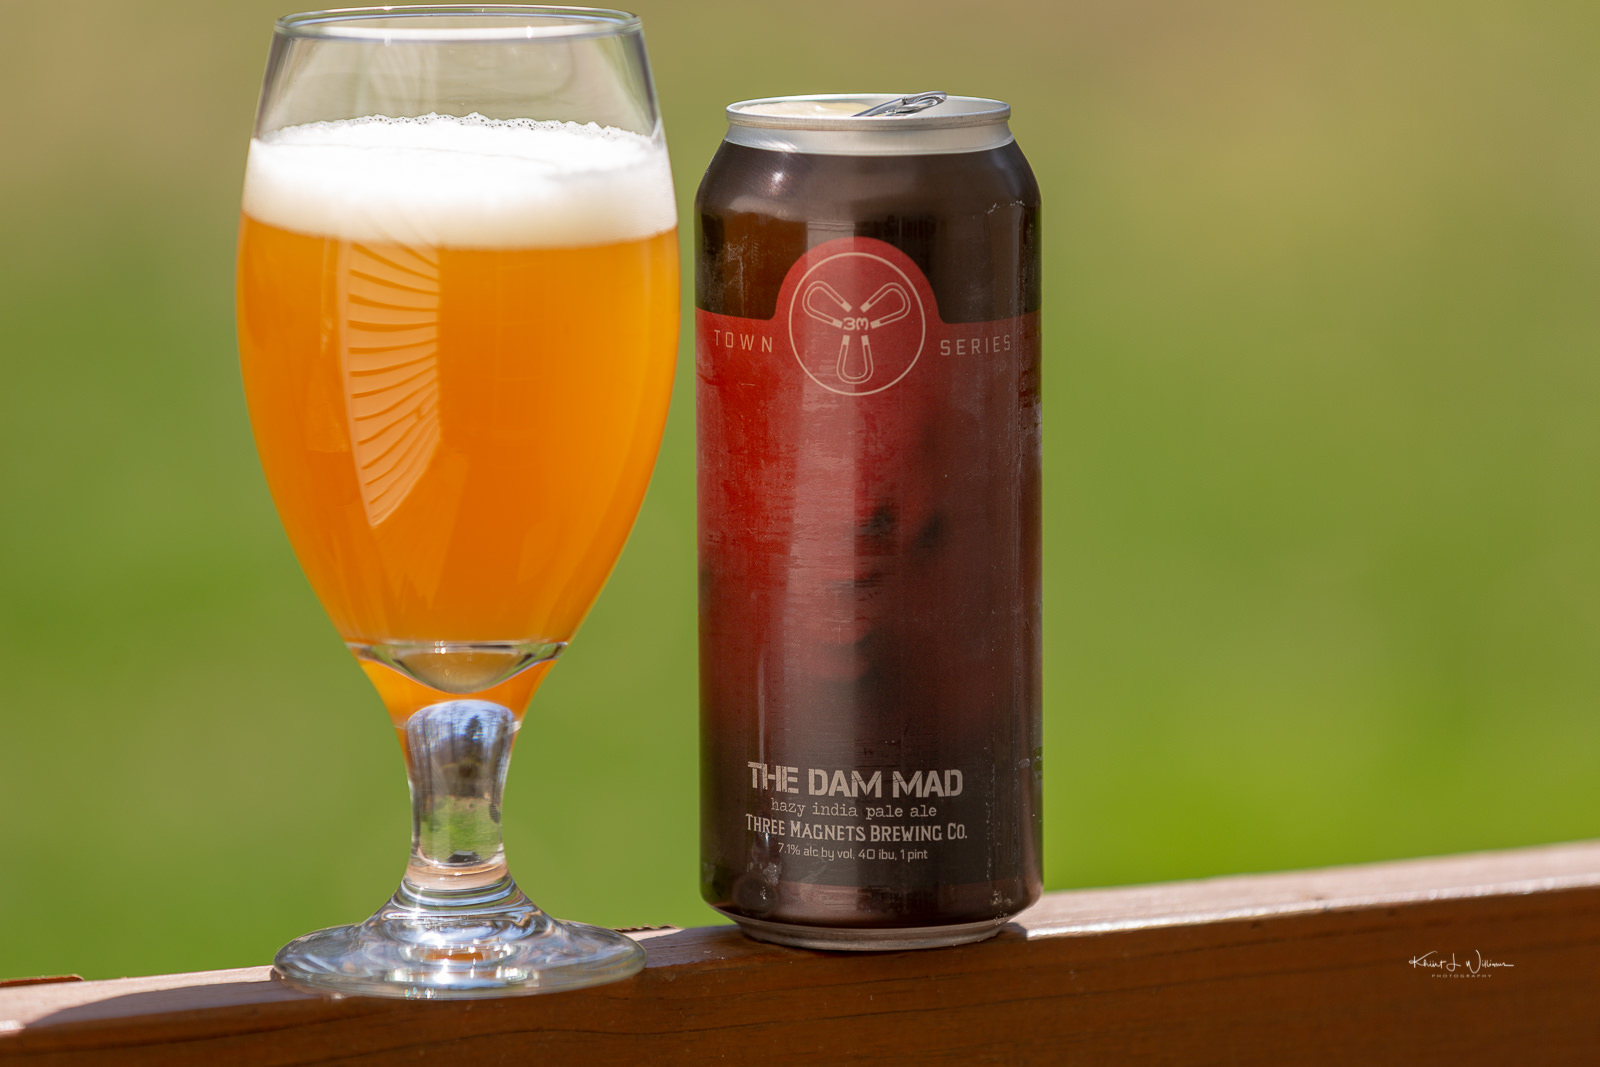 Three Magnets Brewing Company's The Dam Mad